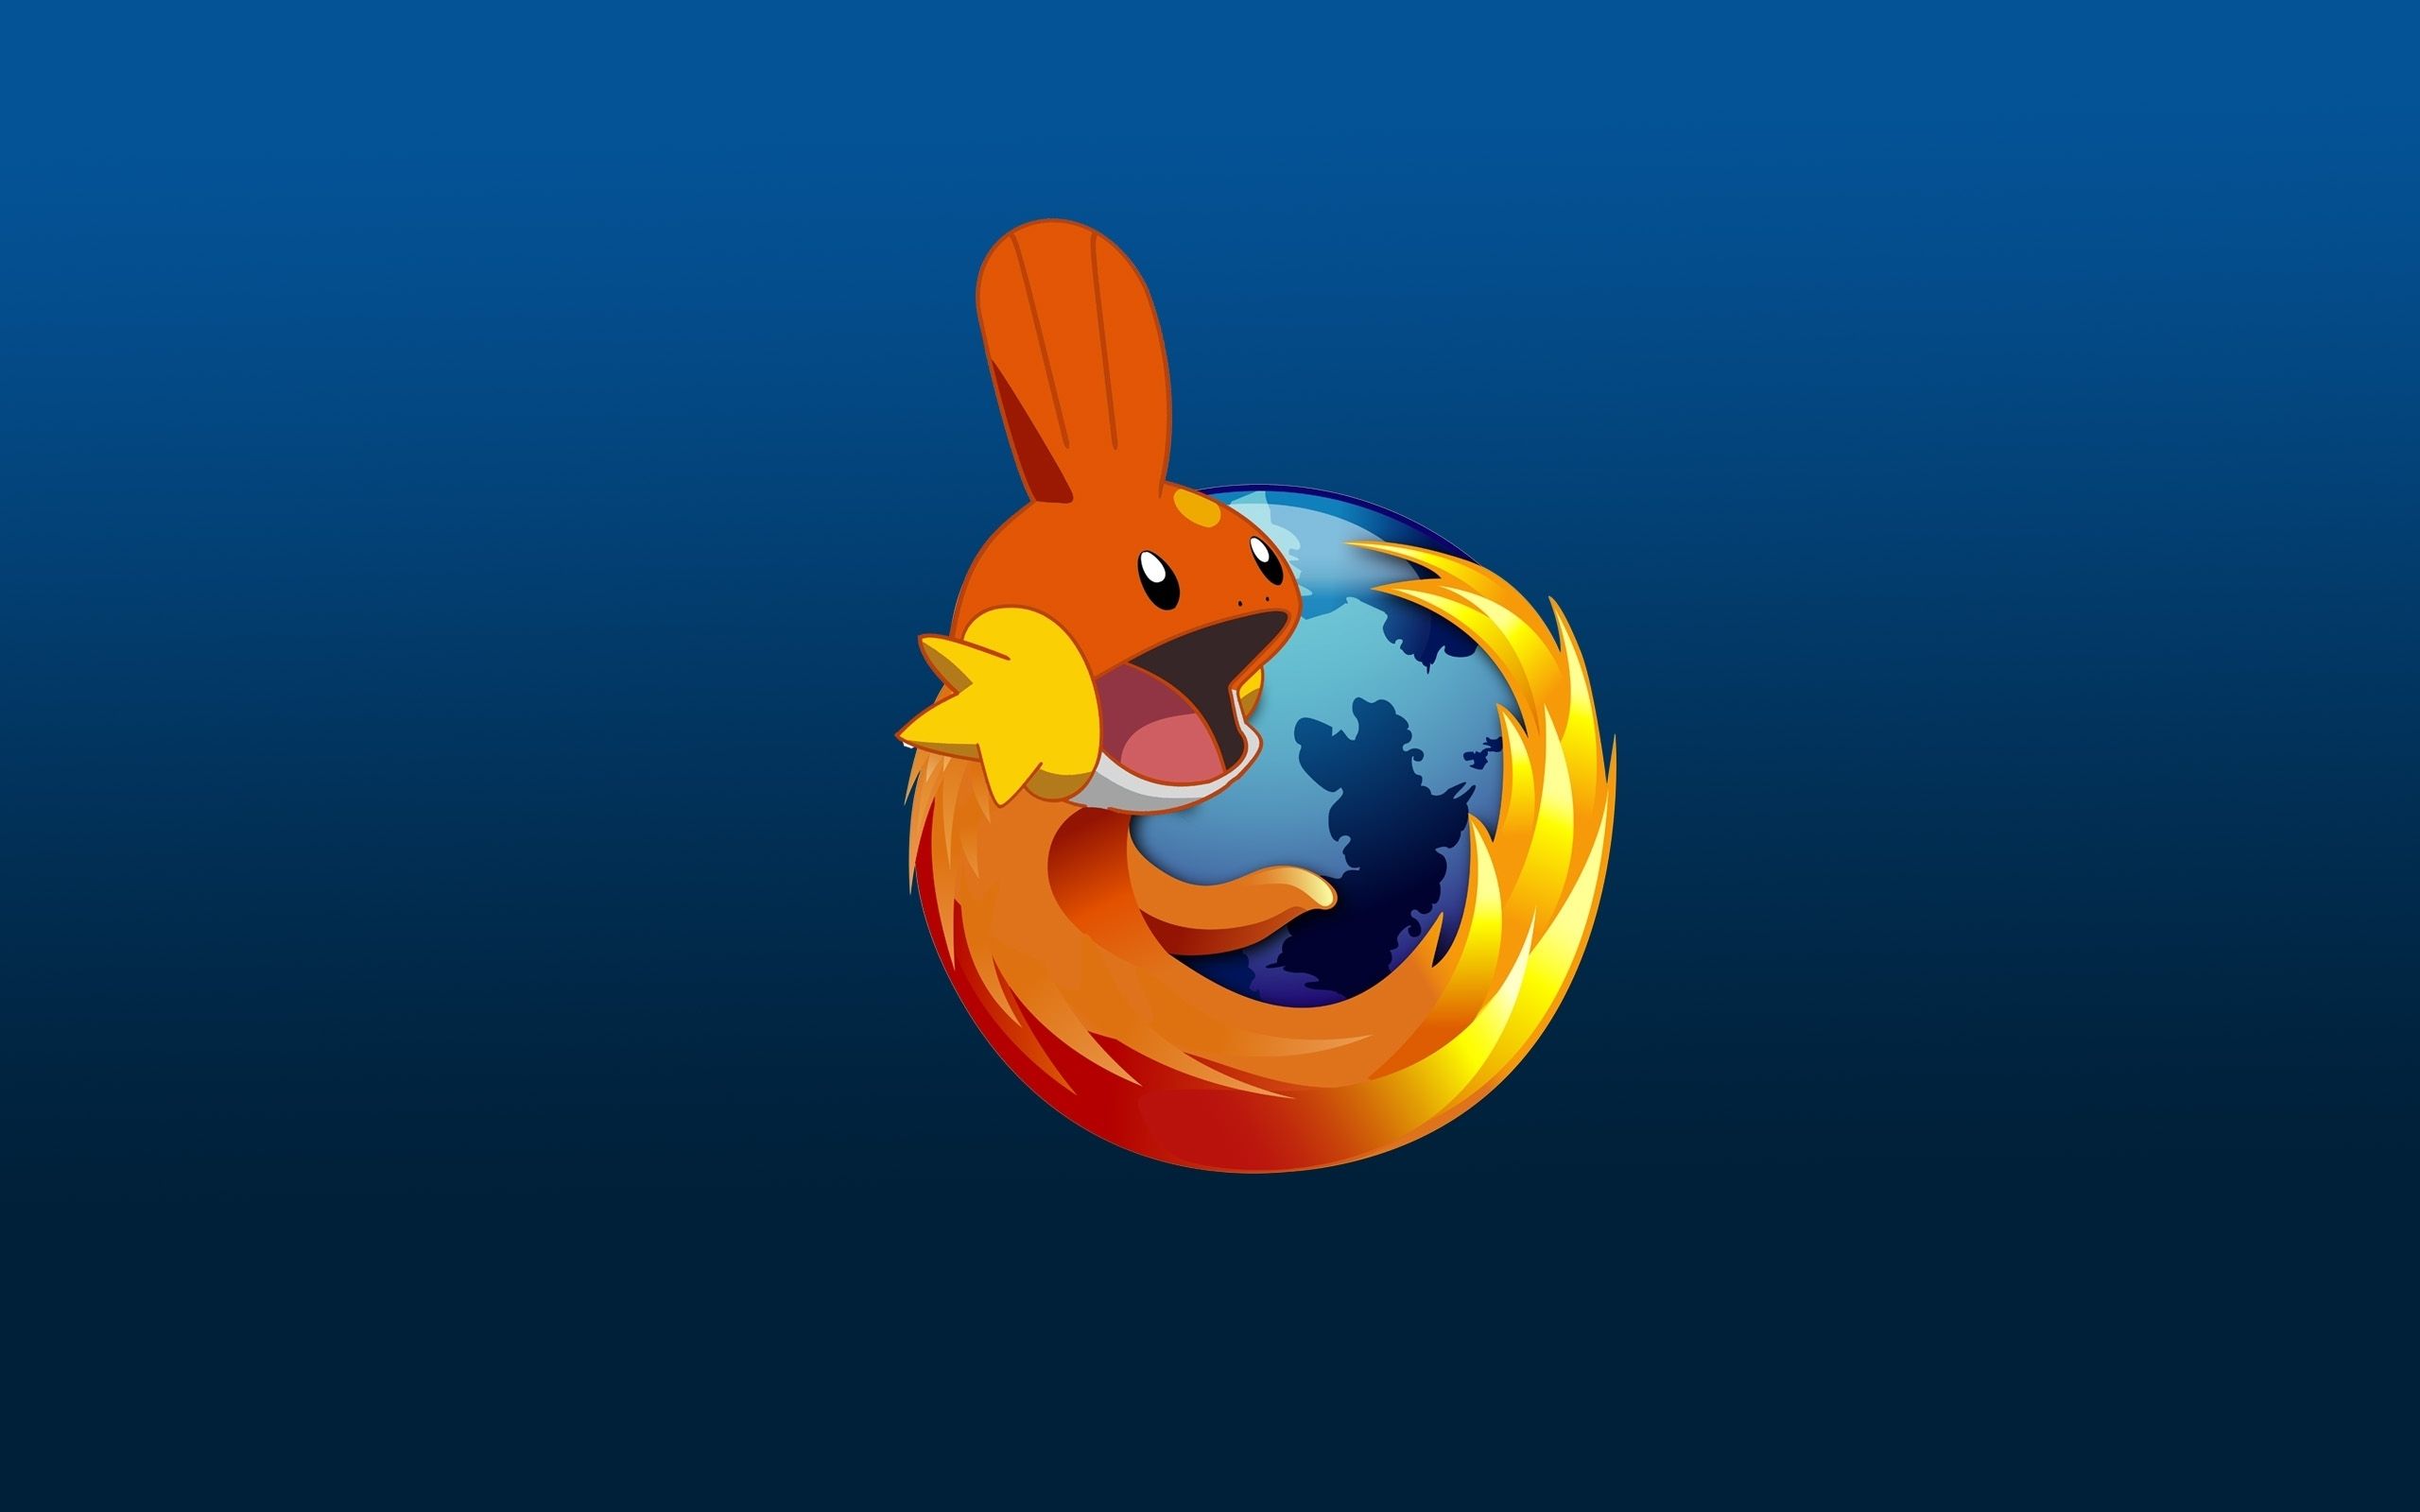 mudkip firefox. funniest thing ever. end of story. Cool pokemon wallpaper, Cartoon wallpaper, Cool wallpaper